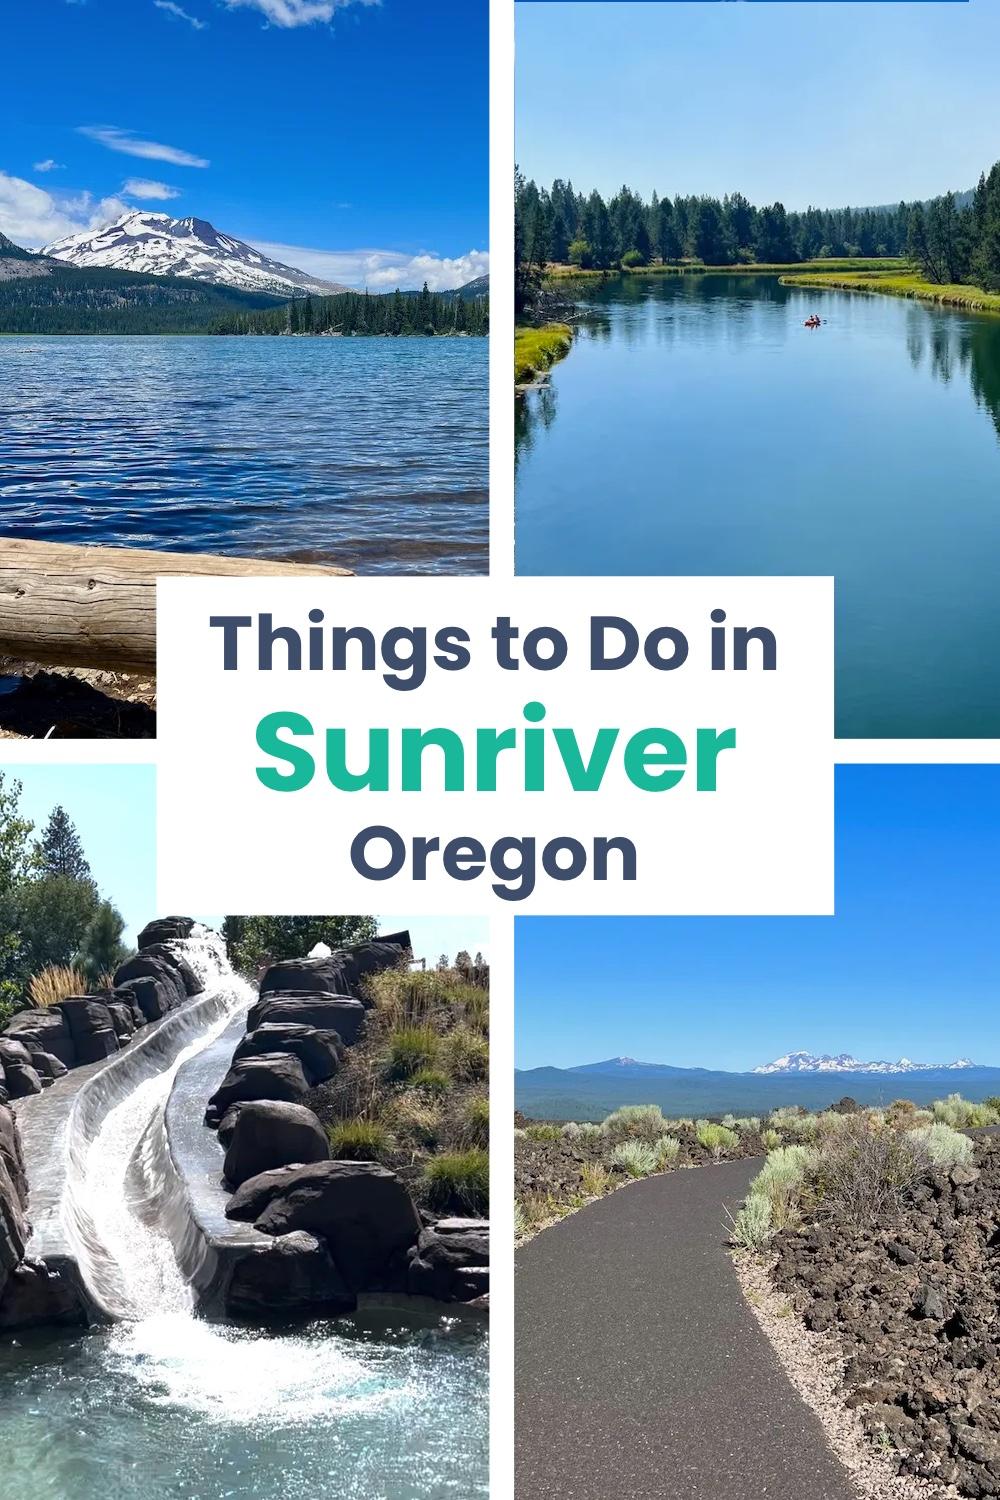 Things to do in Sunriver Oregon